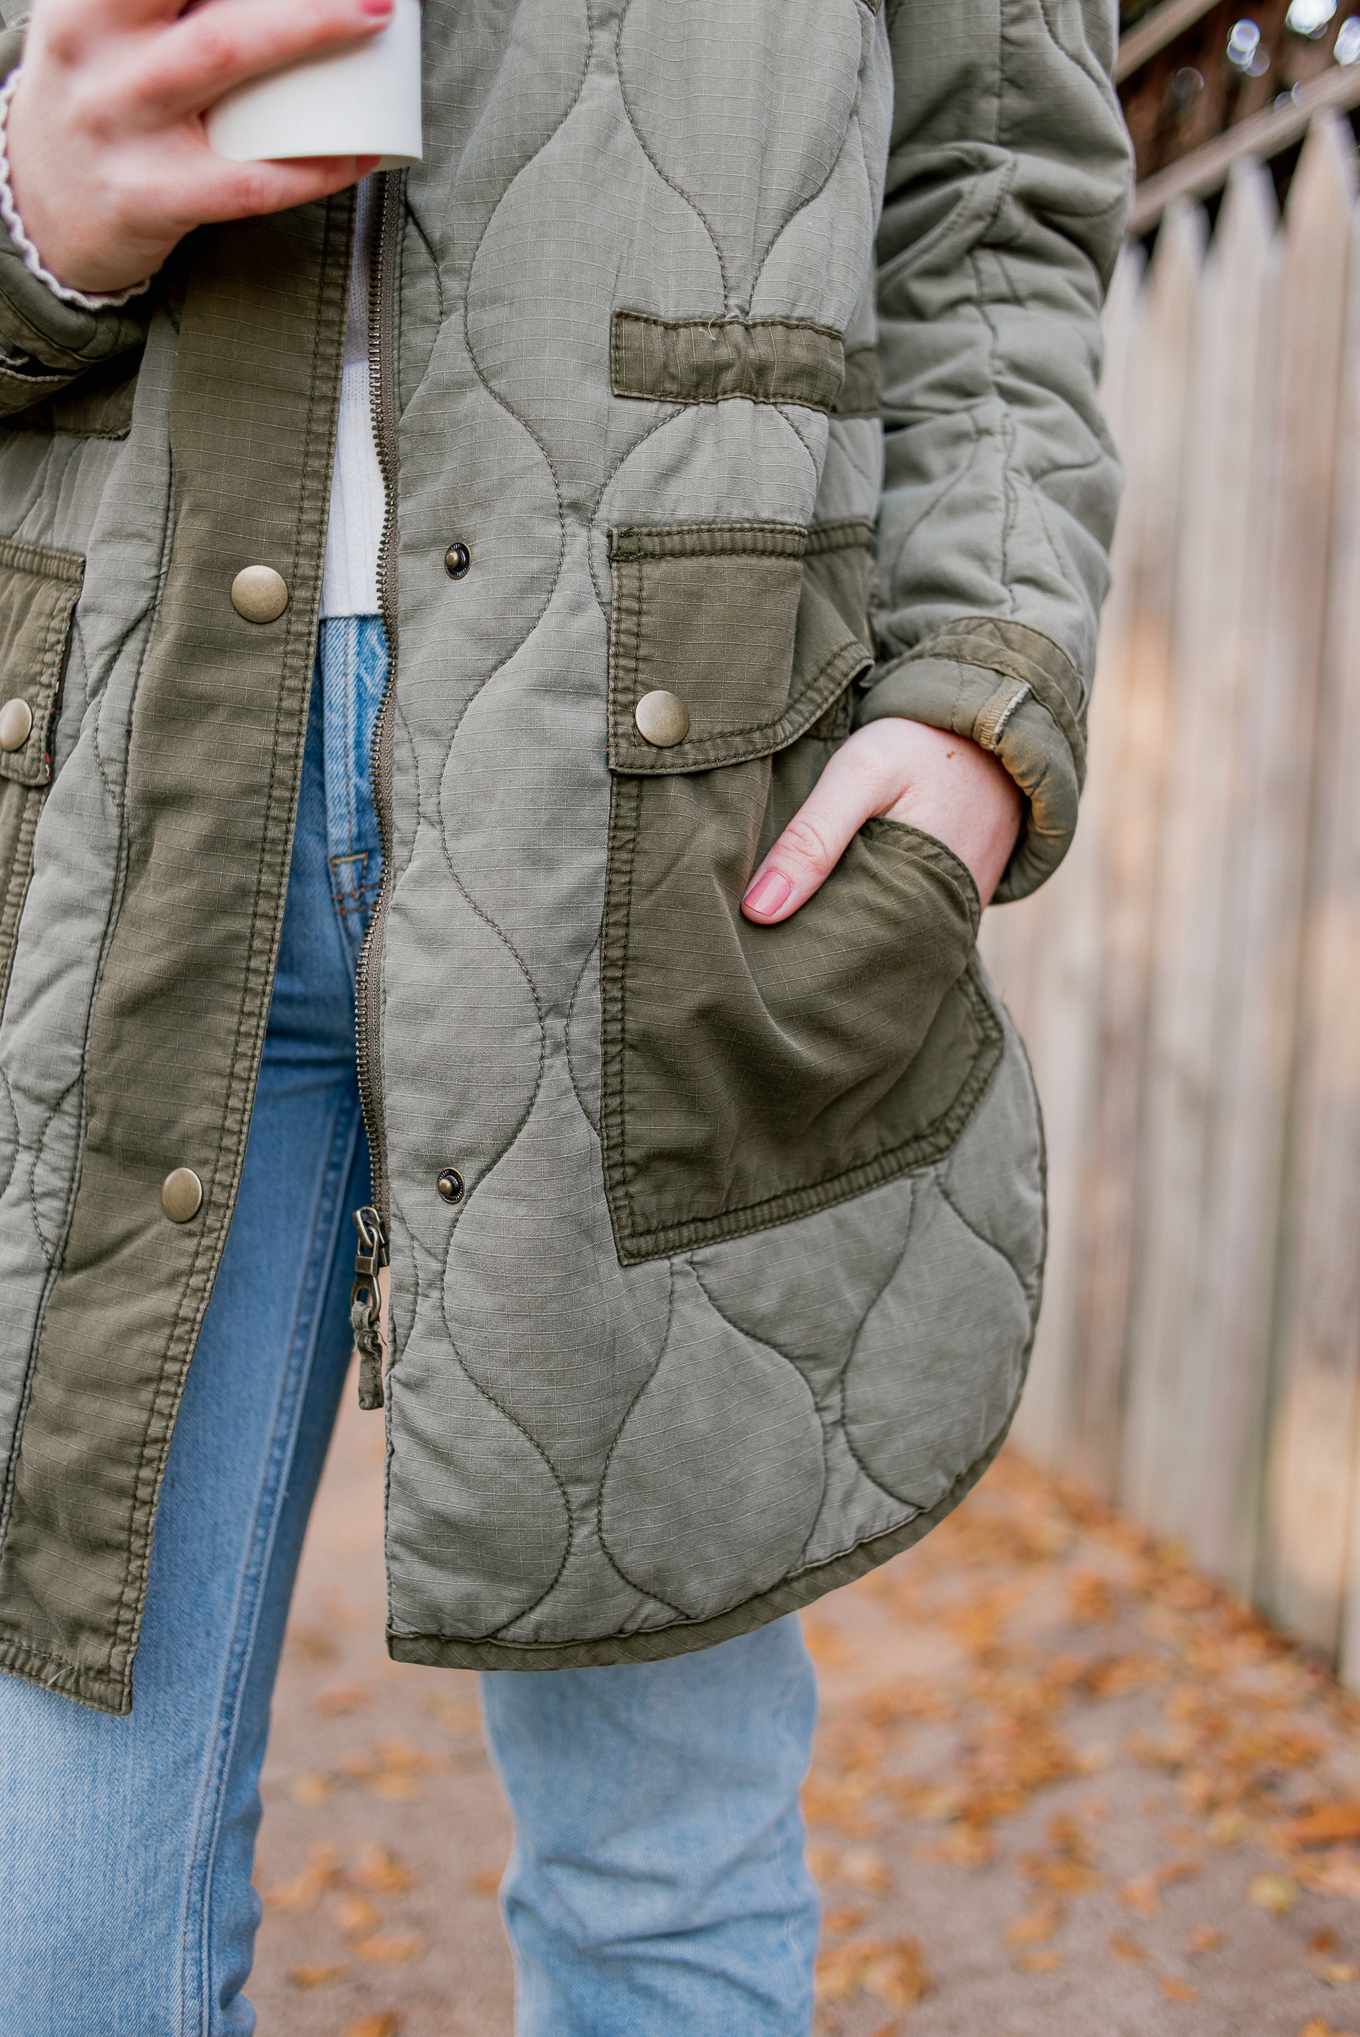 Laura Leigh of Louella Reese styles a quilted field jacket for a casual winter outfit